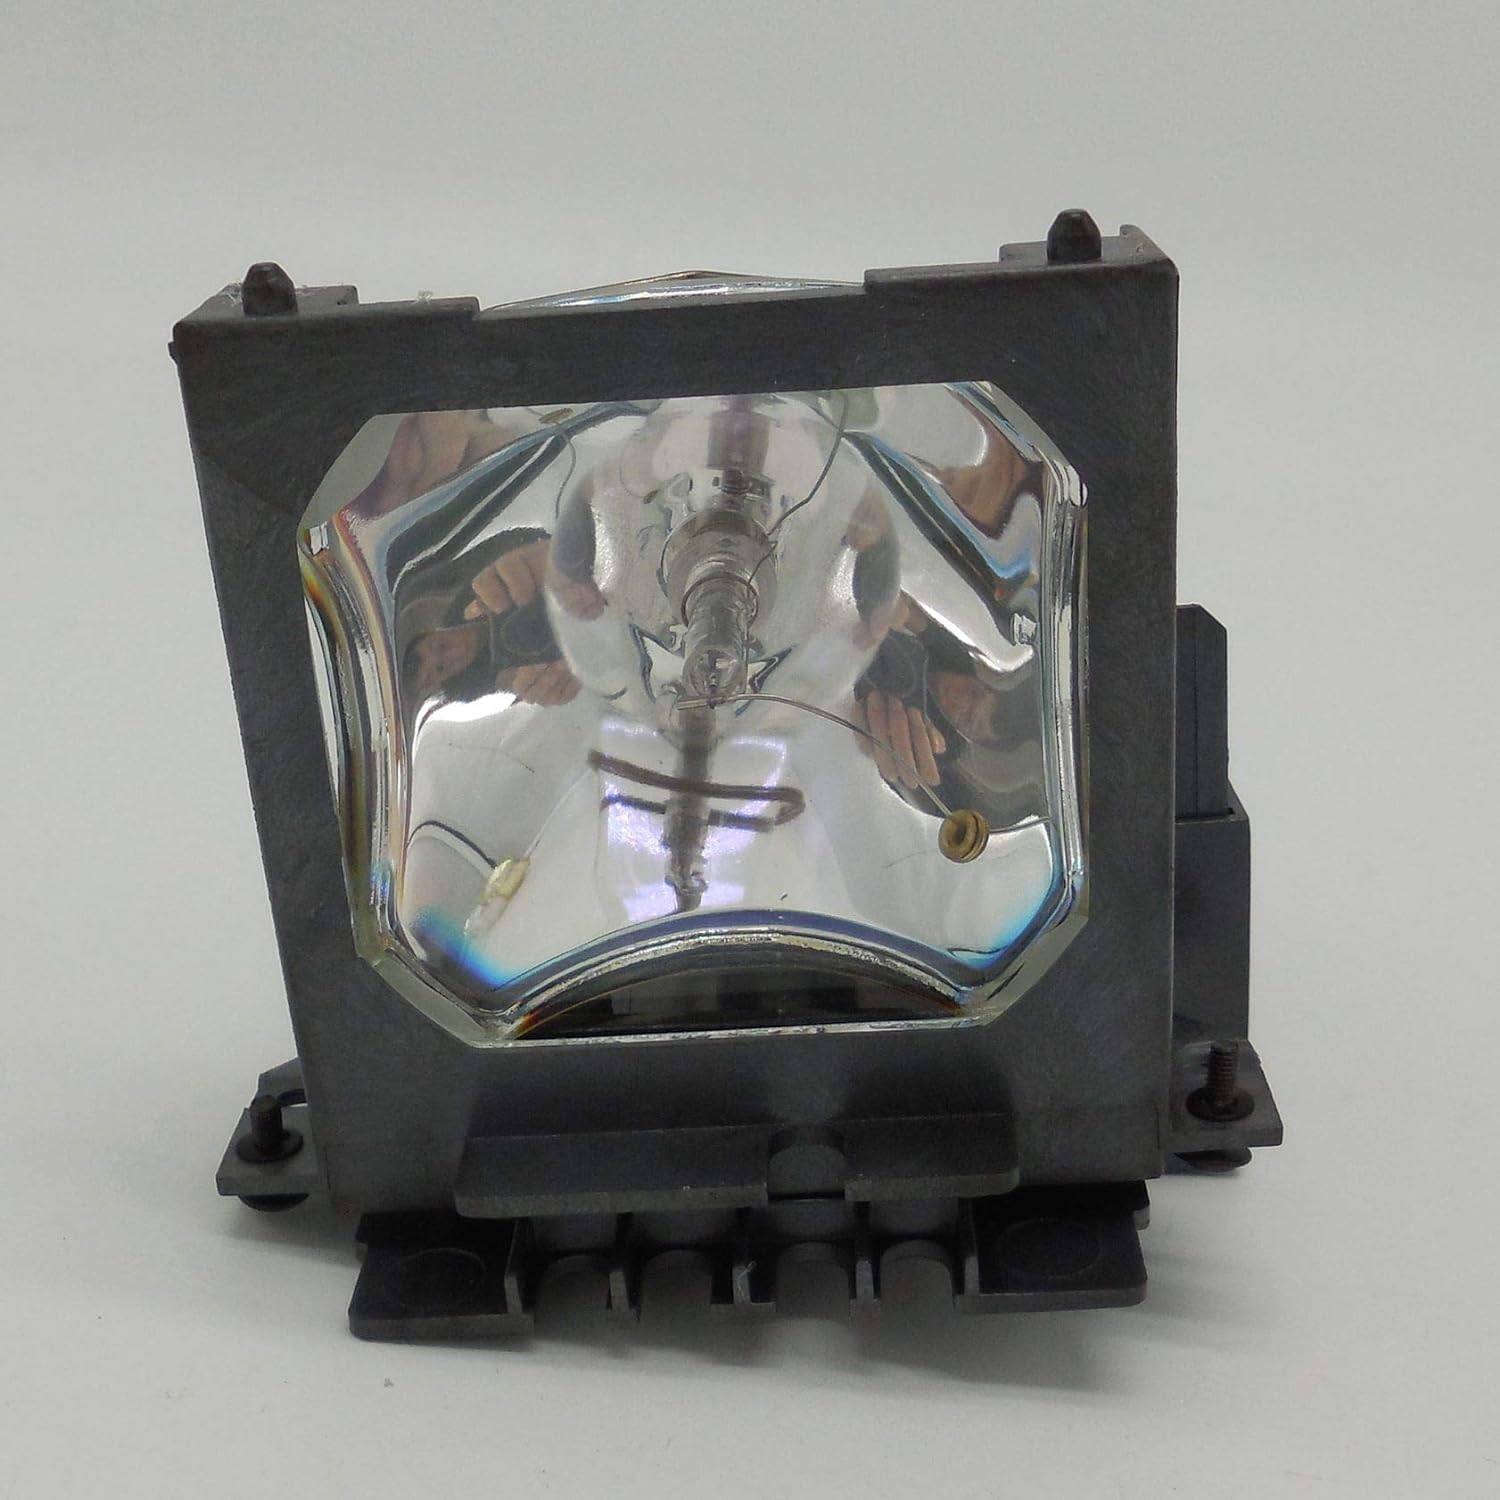 Replacement Projector lamp DT00601 For Hitachi CP-X1230 CP-X1250 CP-X1350